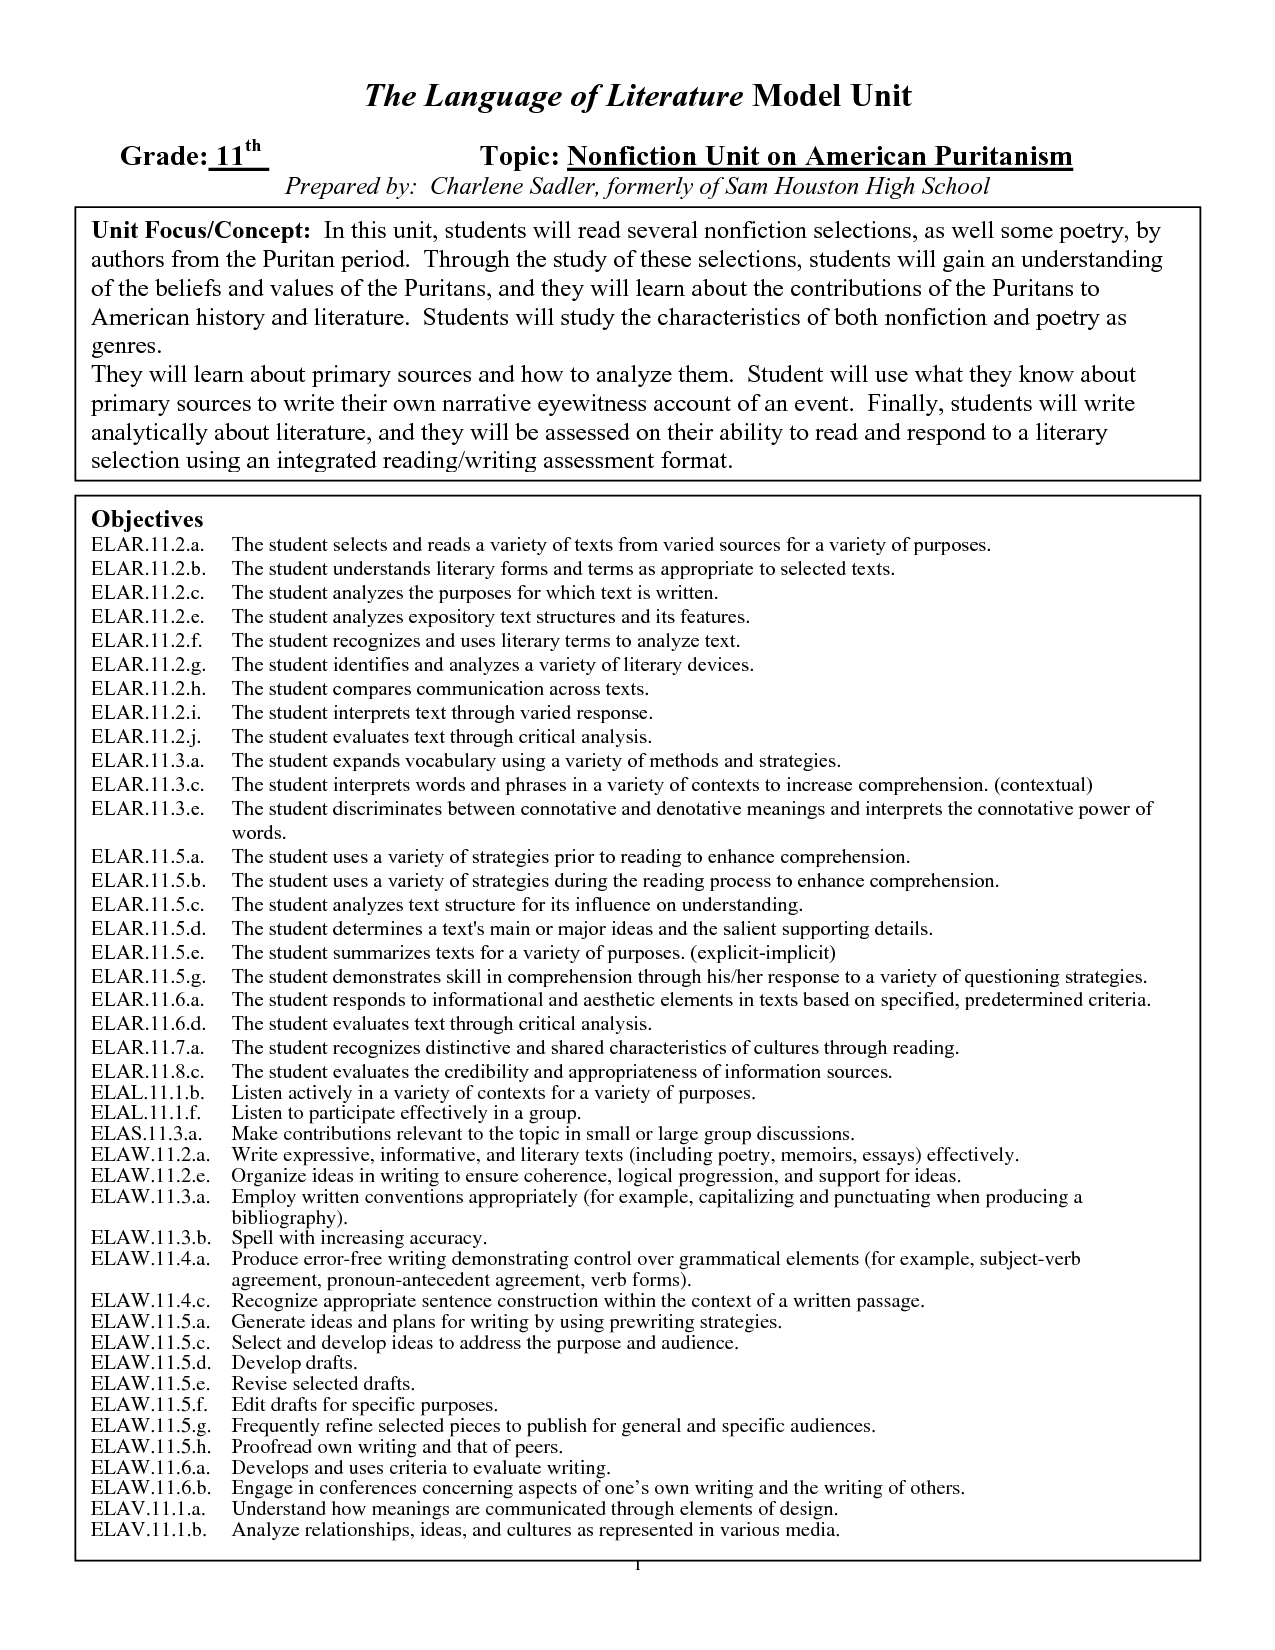 17-best-images-of-11th-grade-science-worksheets-11th-grade-literature-worksheets-9th-grade